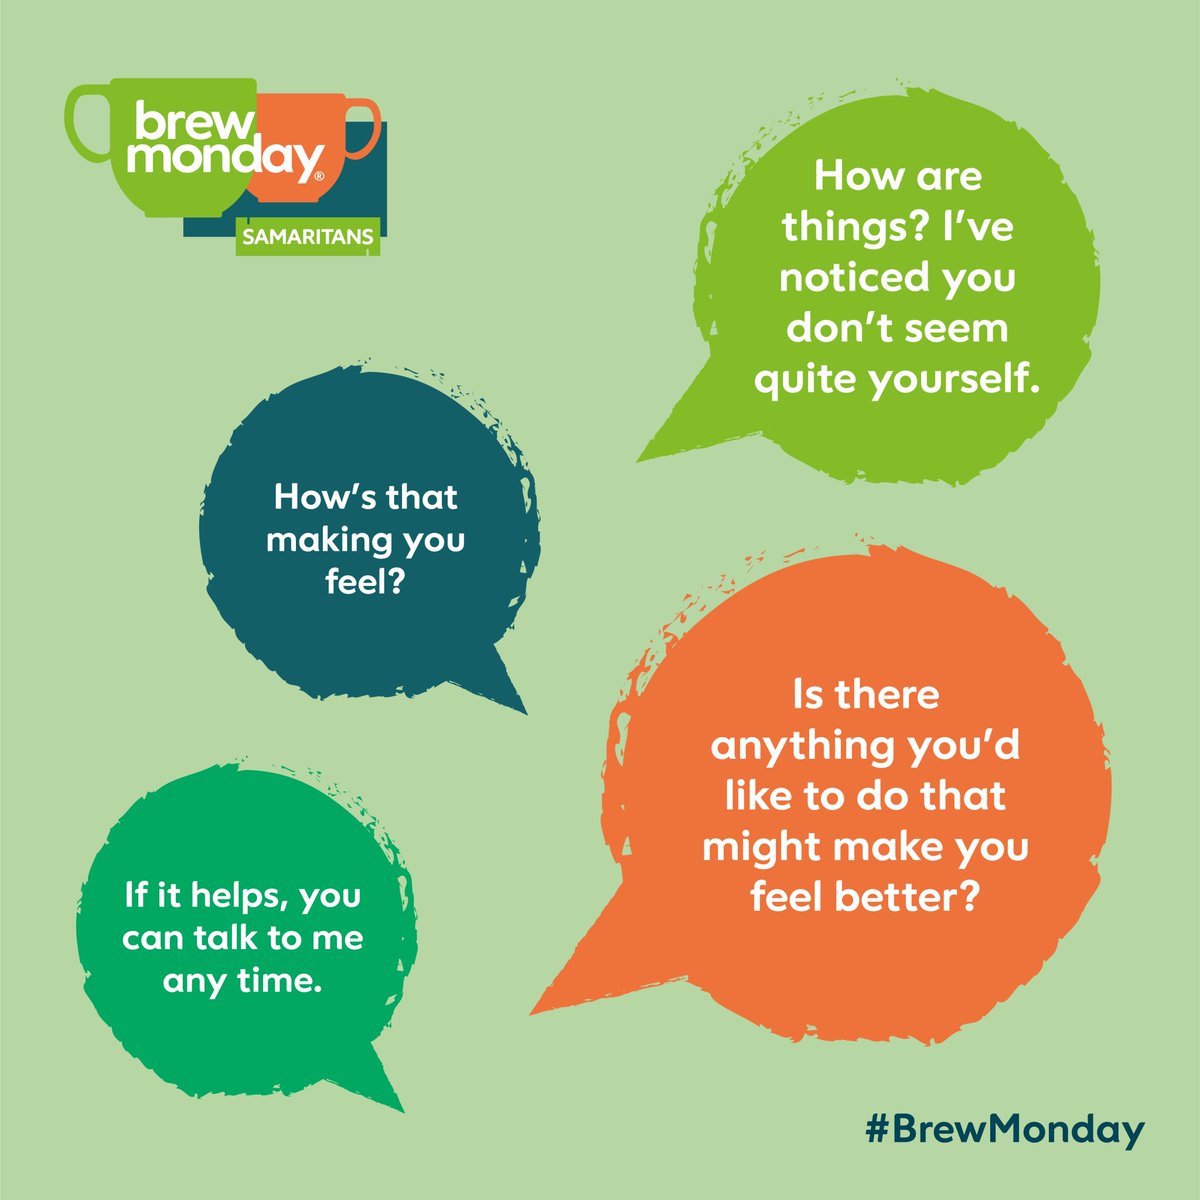 It was #BrewMonday this week. But every day is a good day for a cuppa and a chat. Here are some tips of ways to start a difficult conversation... 
Little chats make a BIG difference.